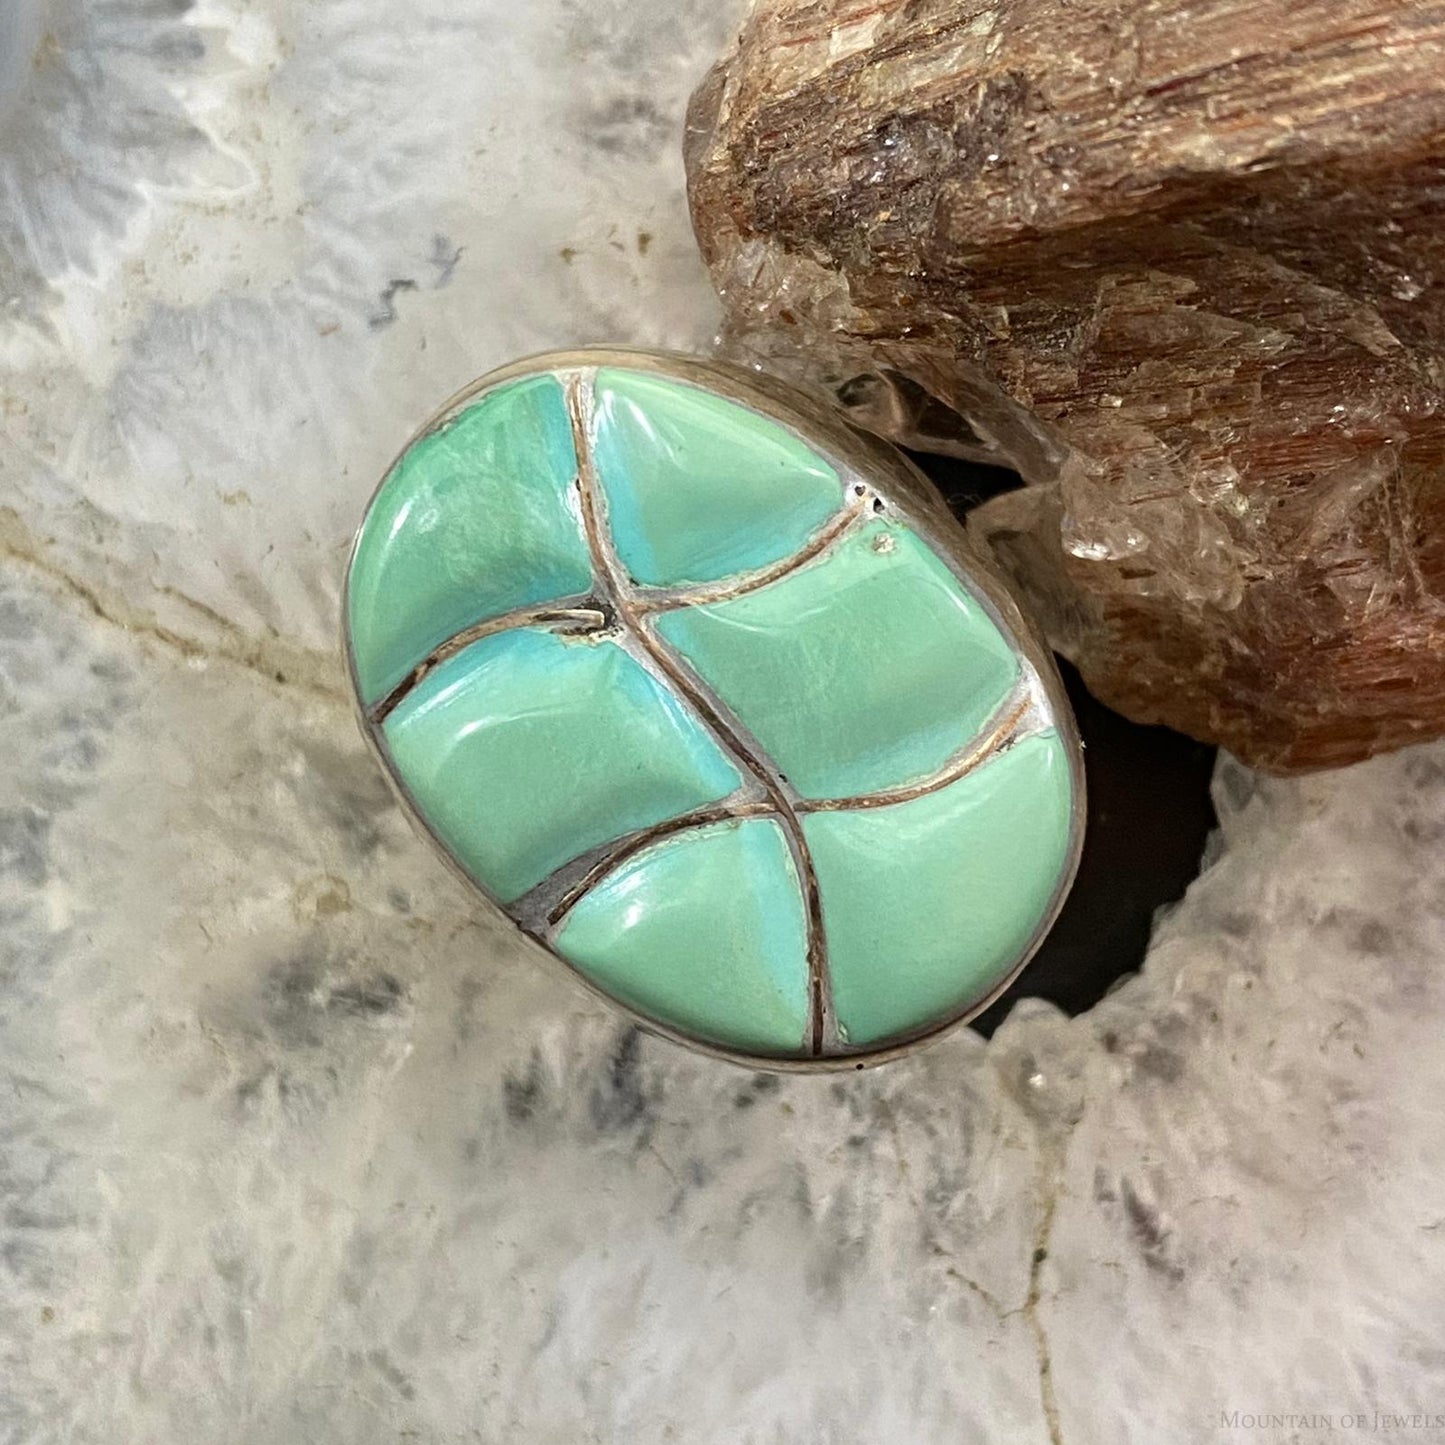 Native American Silver Oval Turquoise Inlay Unisex Shield Ring Size 9